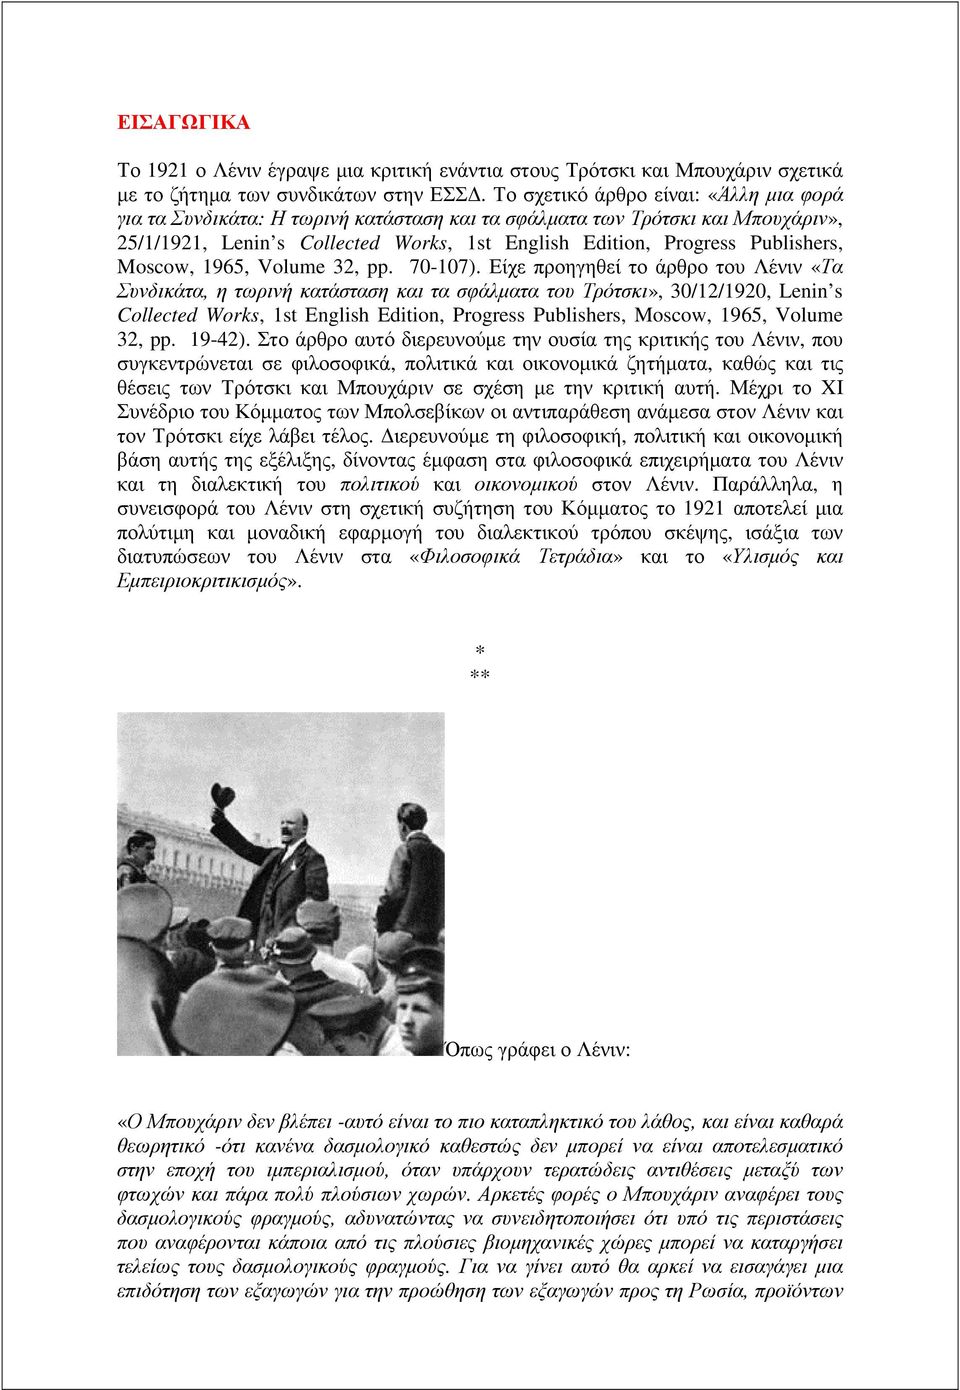 Moscow, 1965, Volume 32, pp. 70-107).